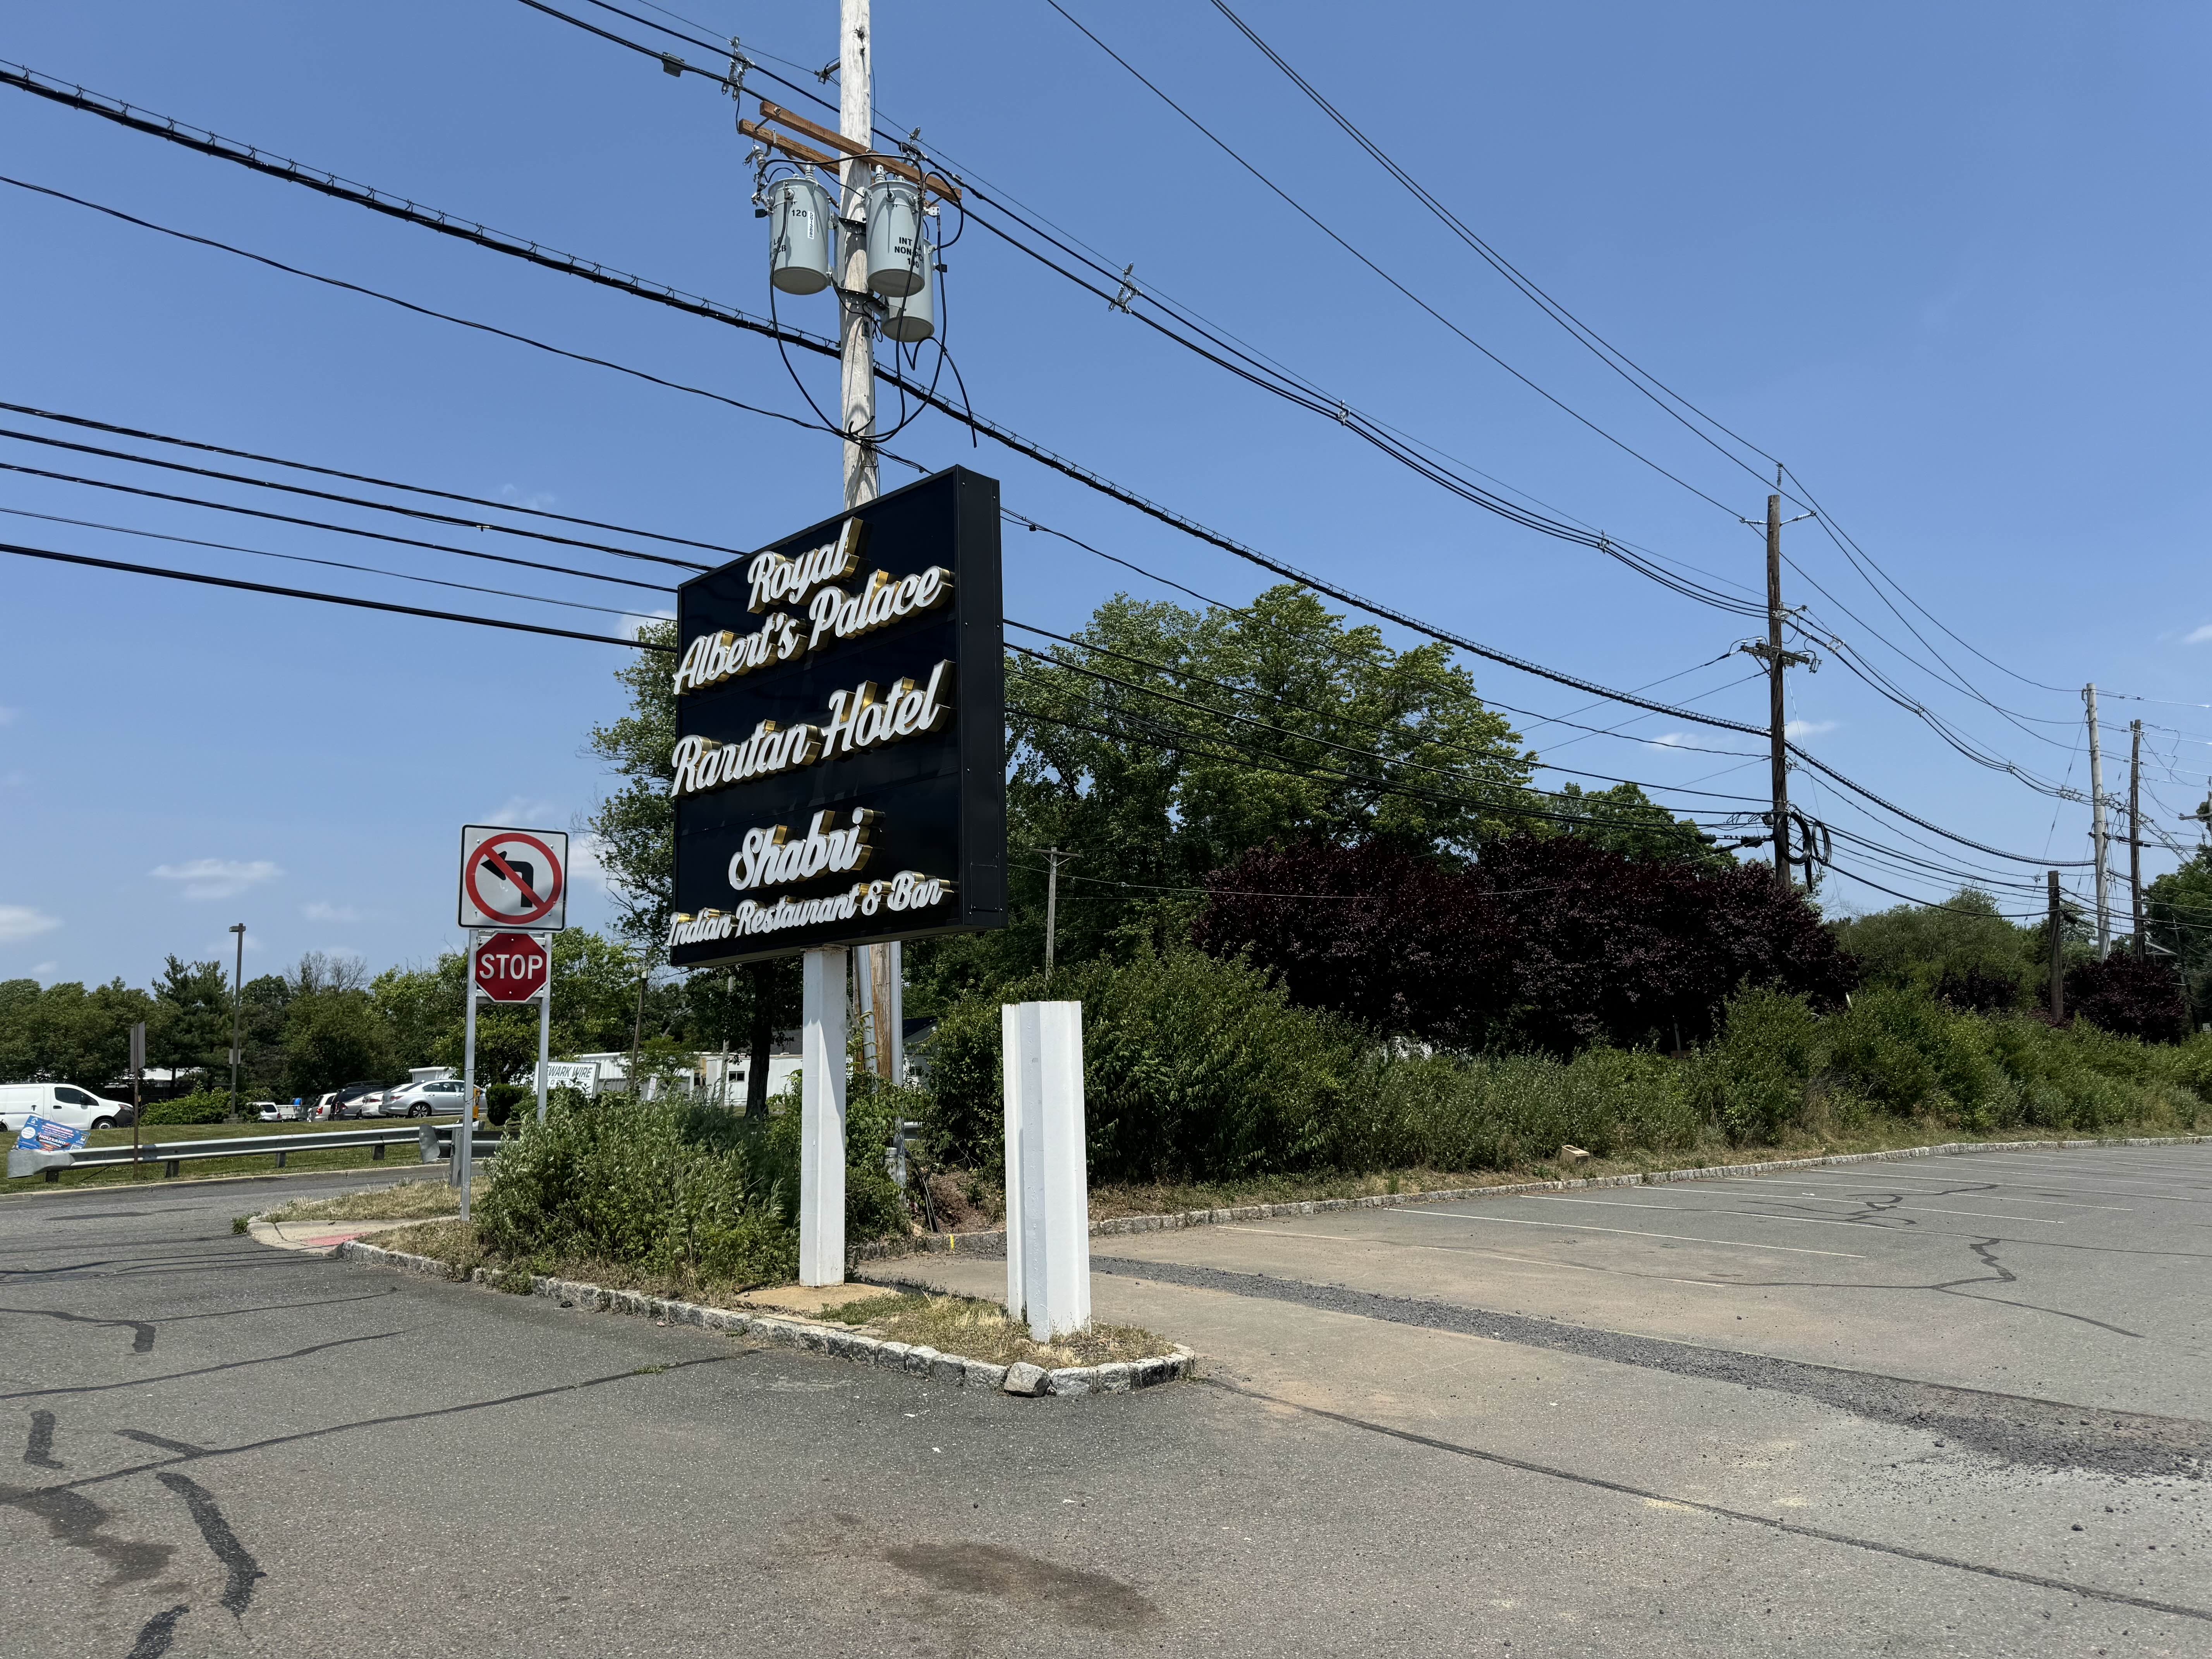 A sign at the entrance of the parking lot for the Raritan Hotel and Royal Albert’s Palace banquet hall on June 17. ZFJ/Alvin Wu